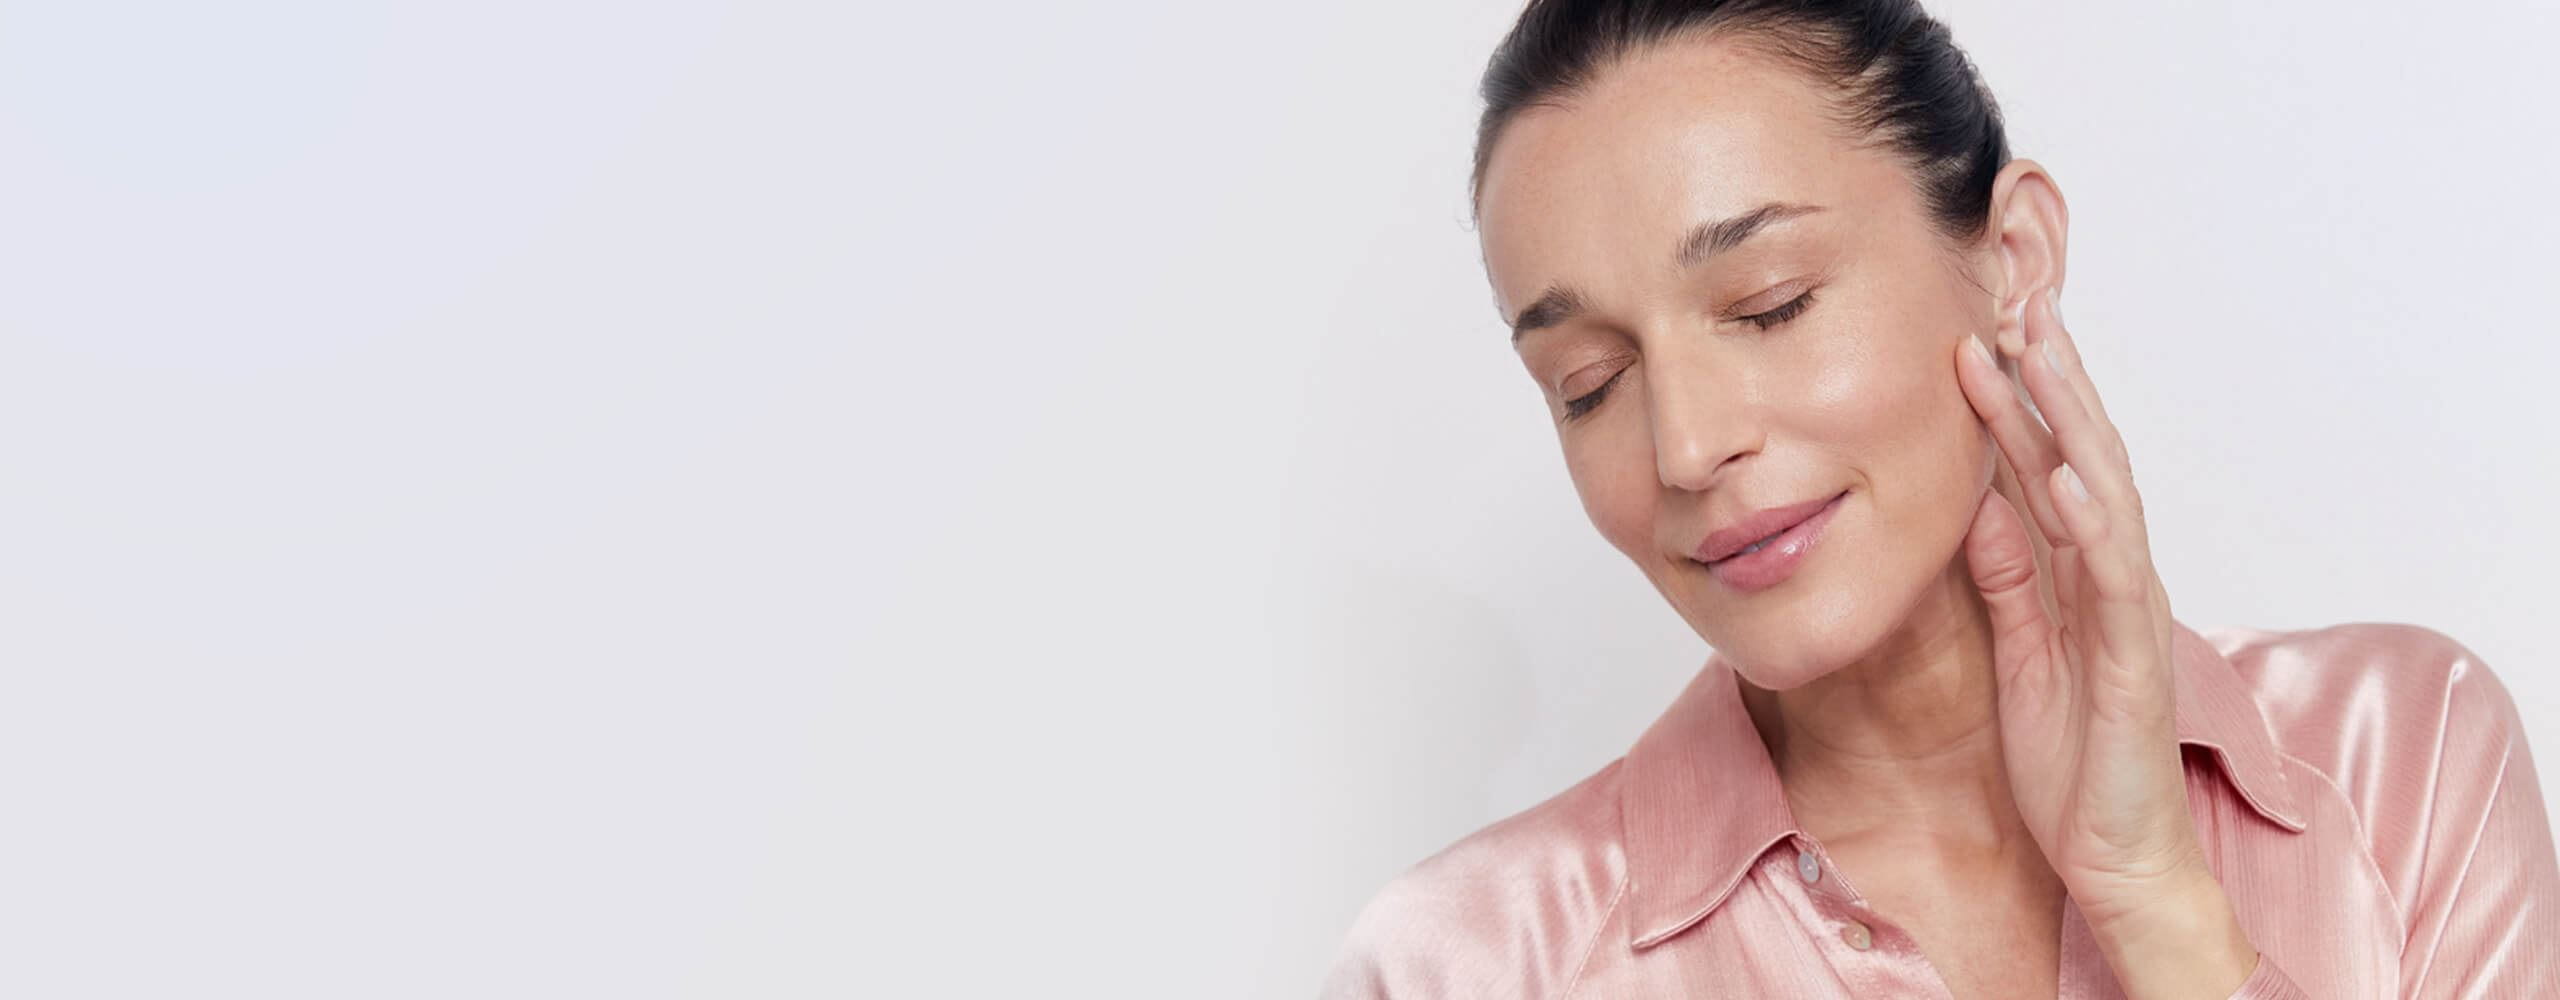 View of a female model with brown hair and wearing a light pink silk shirt closing her eyes against a light grey background.